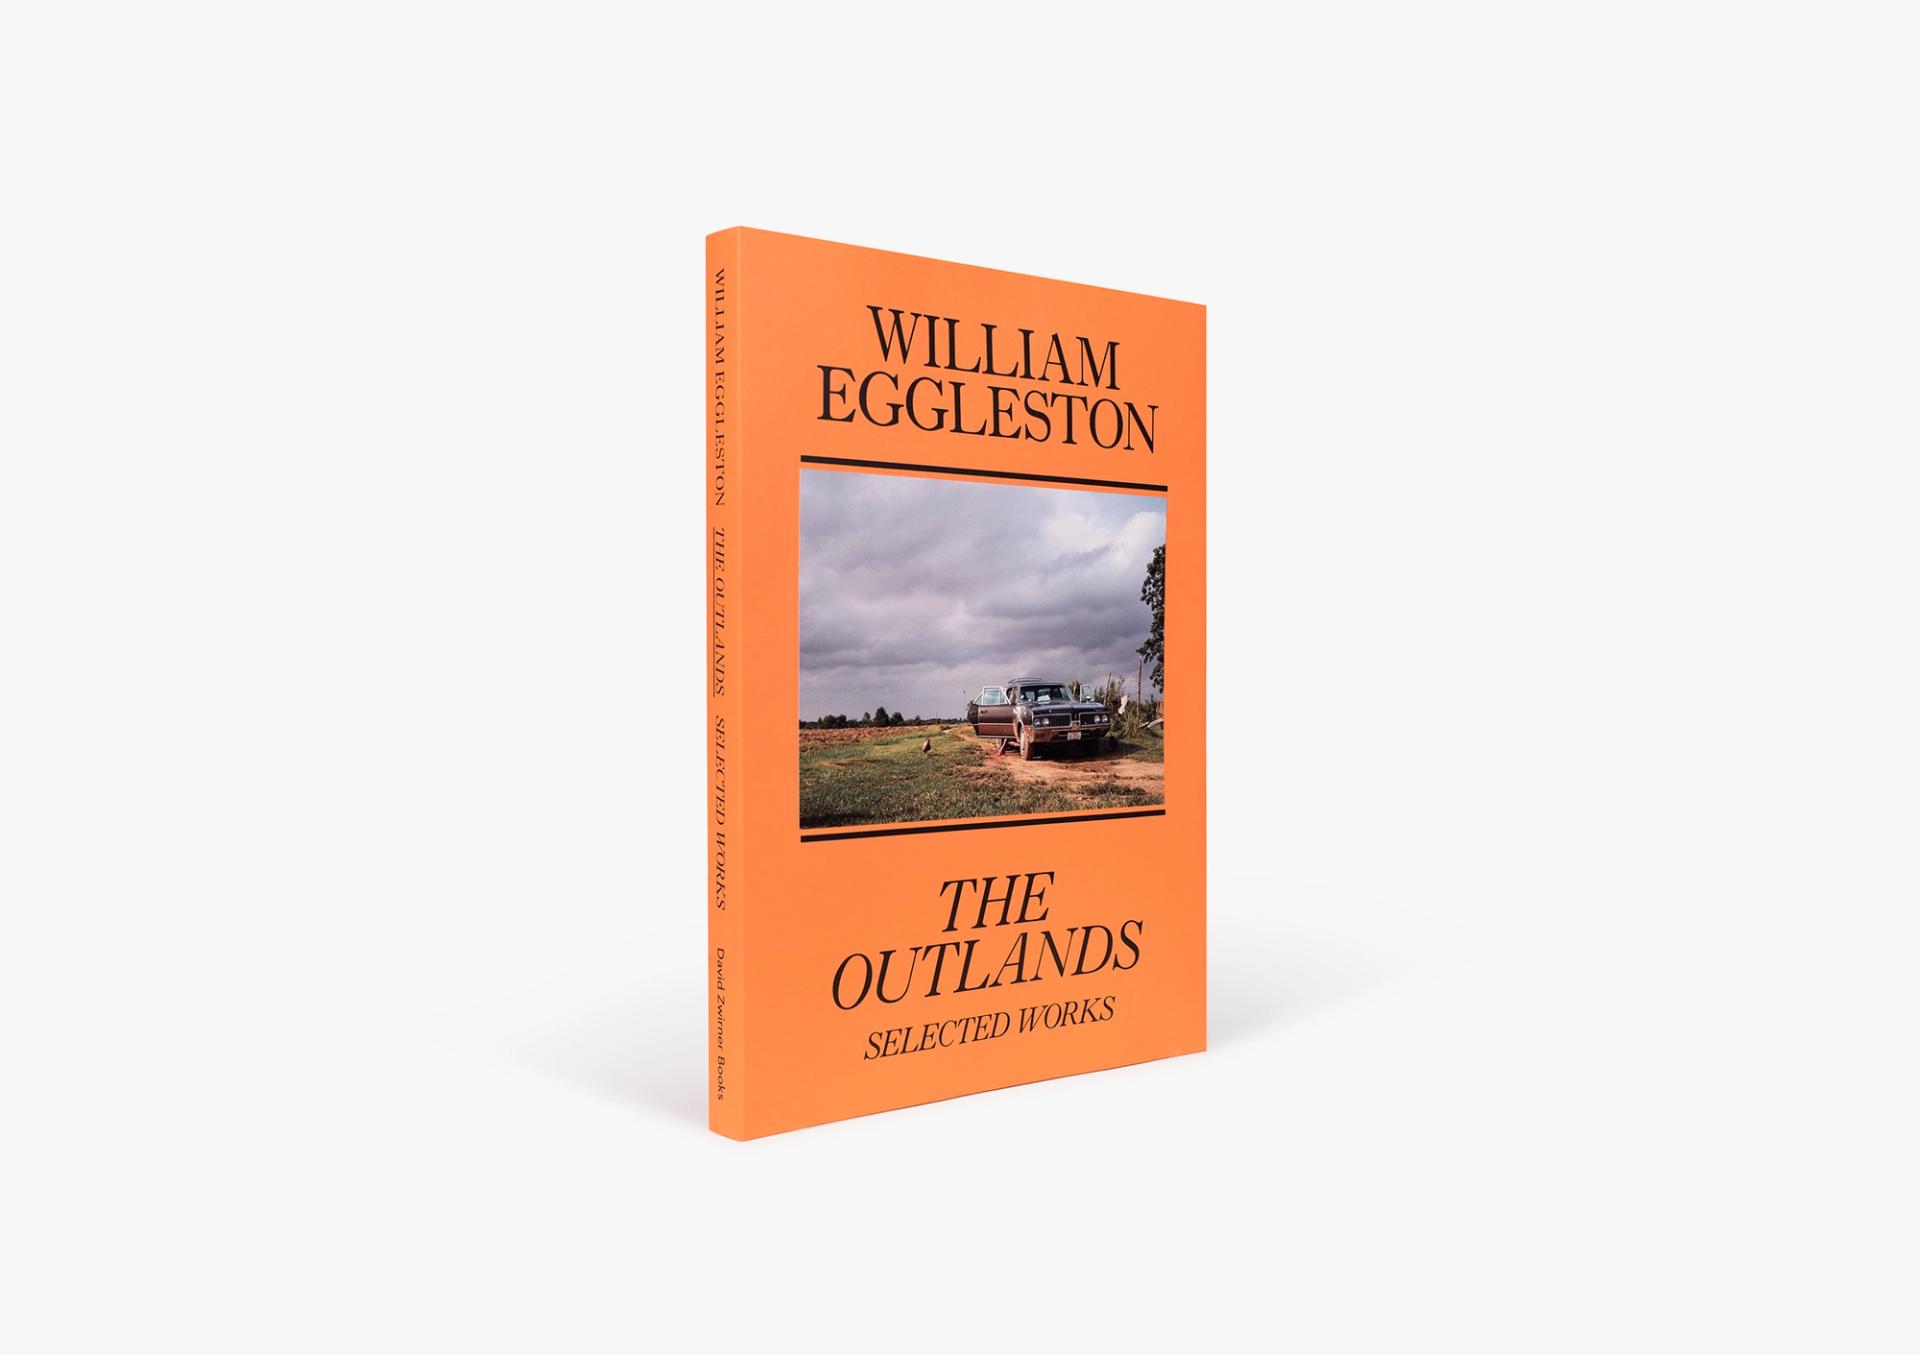 William Eggleston,The Outlands, Selected Works, New York, David Zwirner Books.